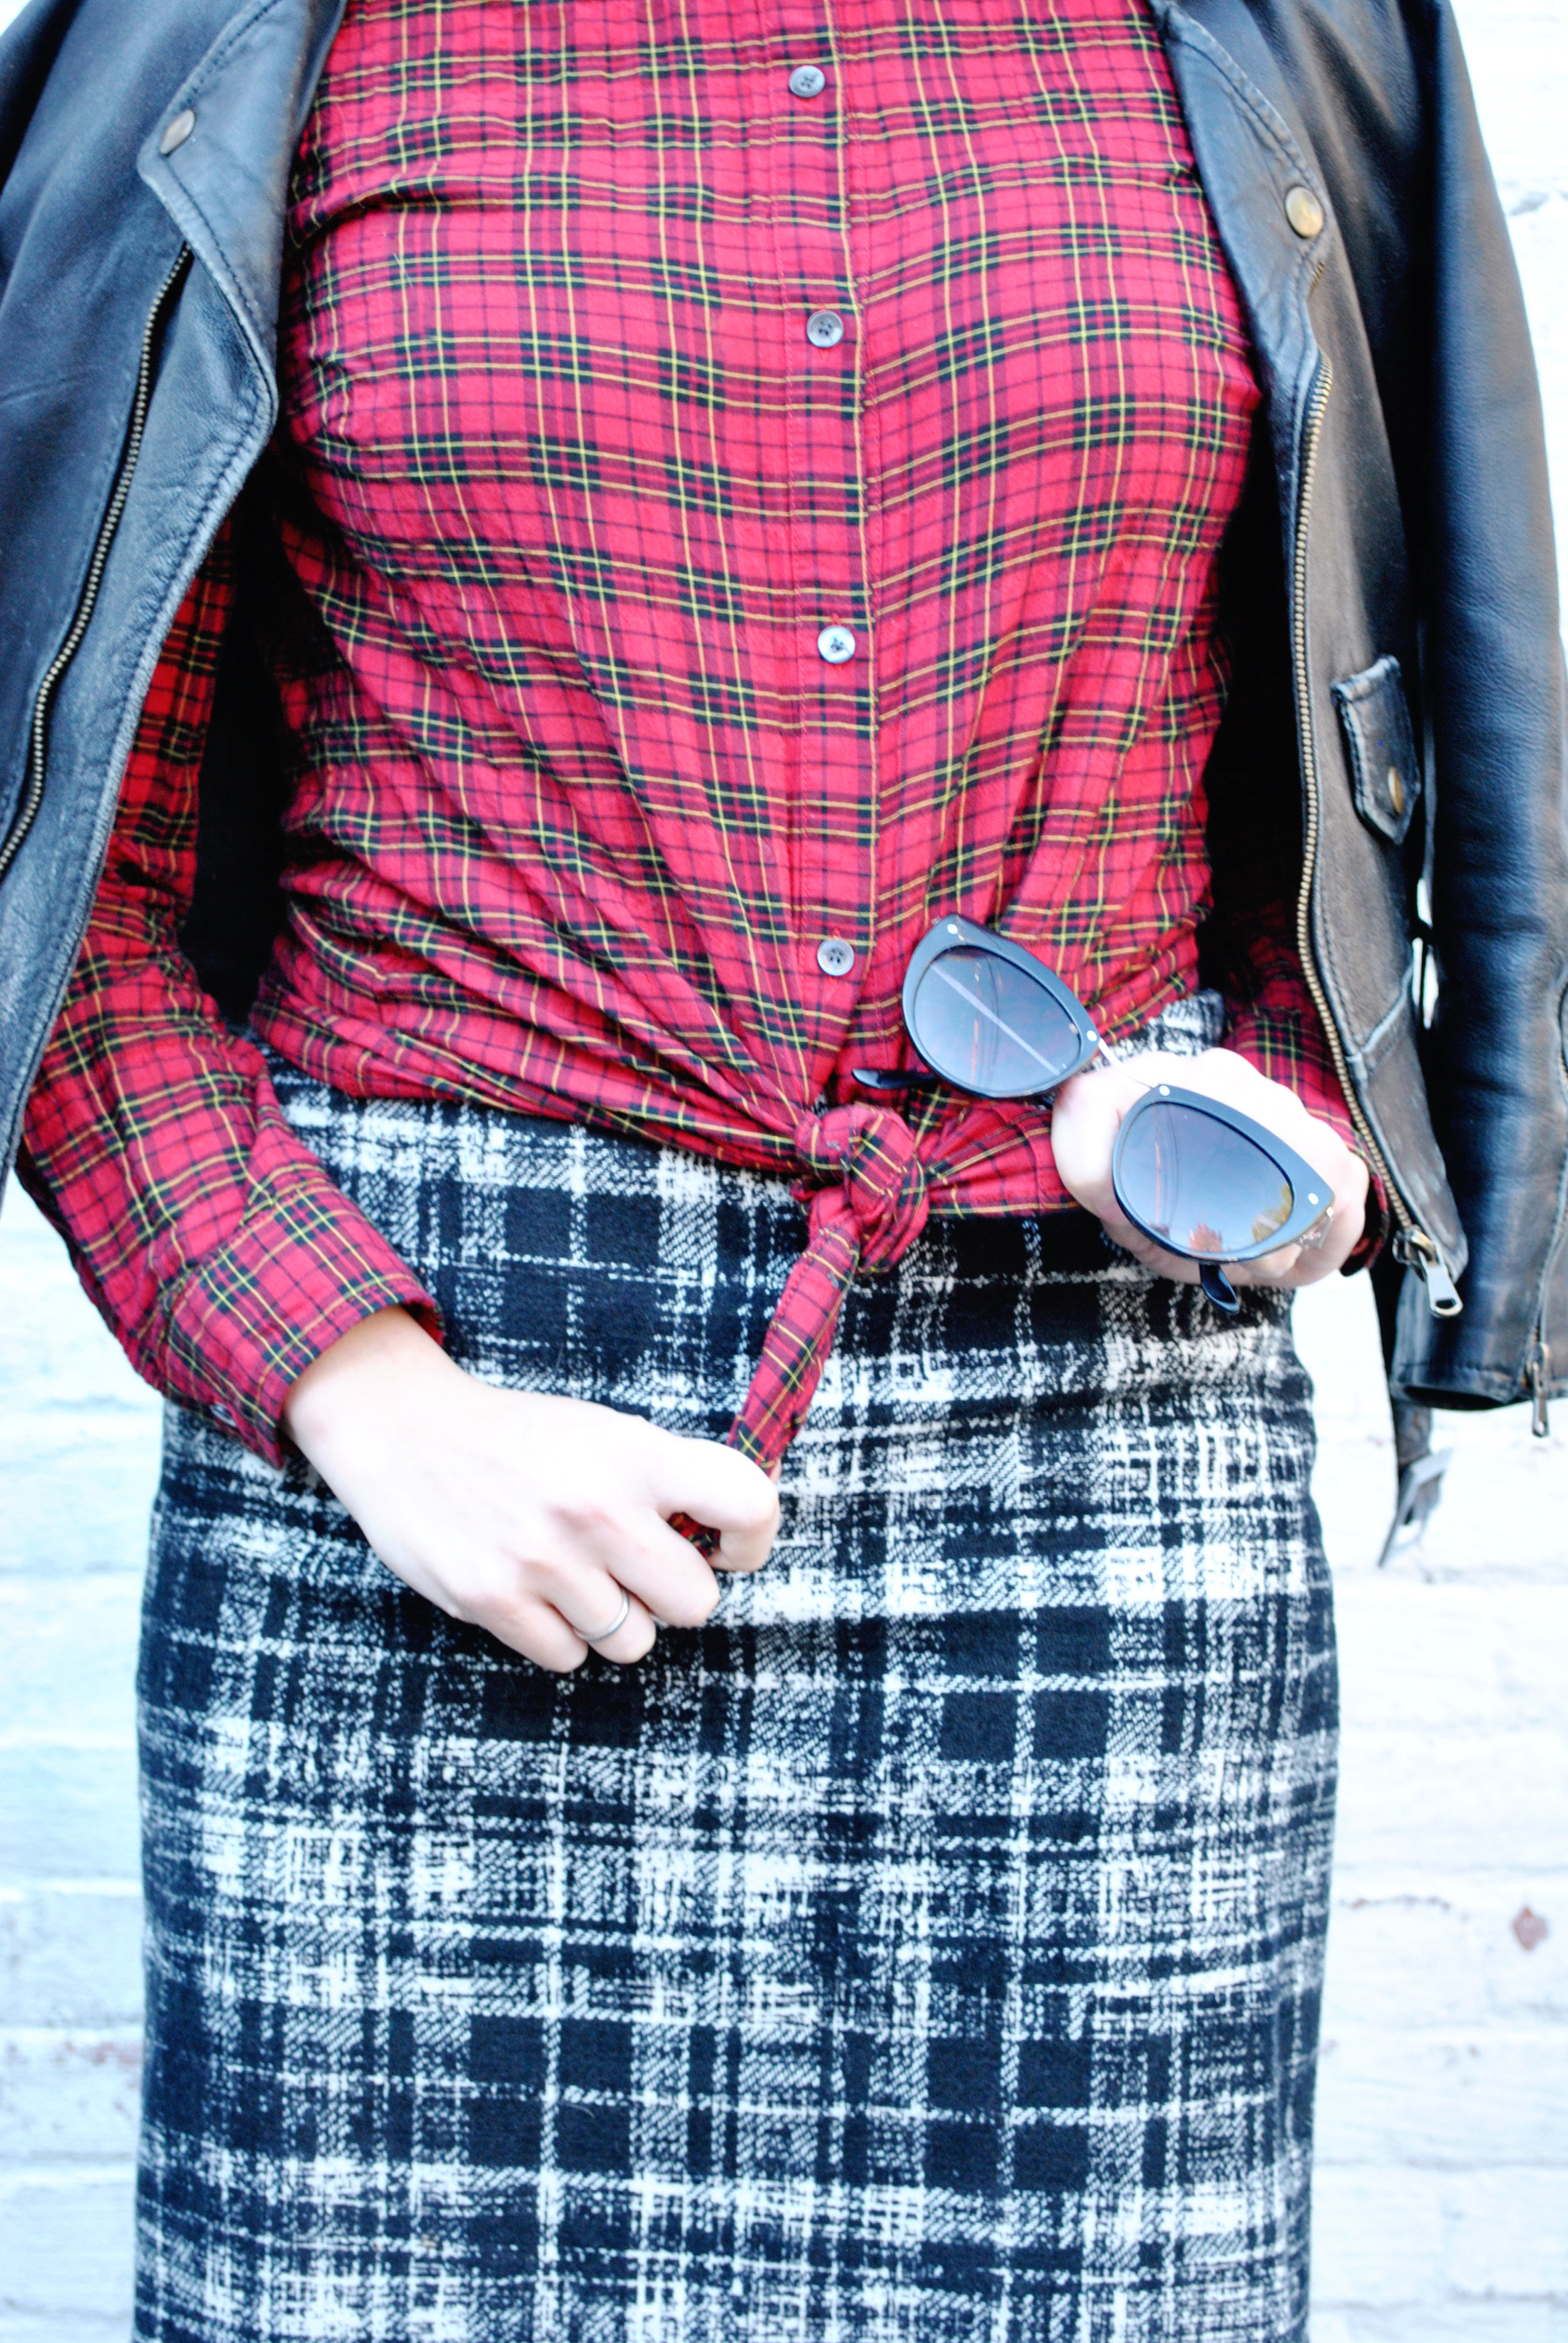 thoughtfulwish | preppy, plaid, plaid outfit, fall outfit, winter outfit, j.mclaughlin, ann taylor, boston fashion, fashion blogger, fblog, christian louboutin